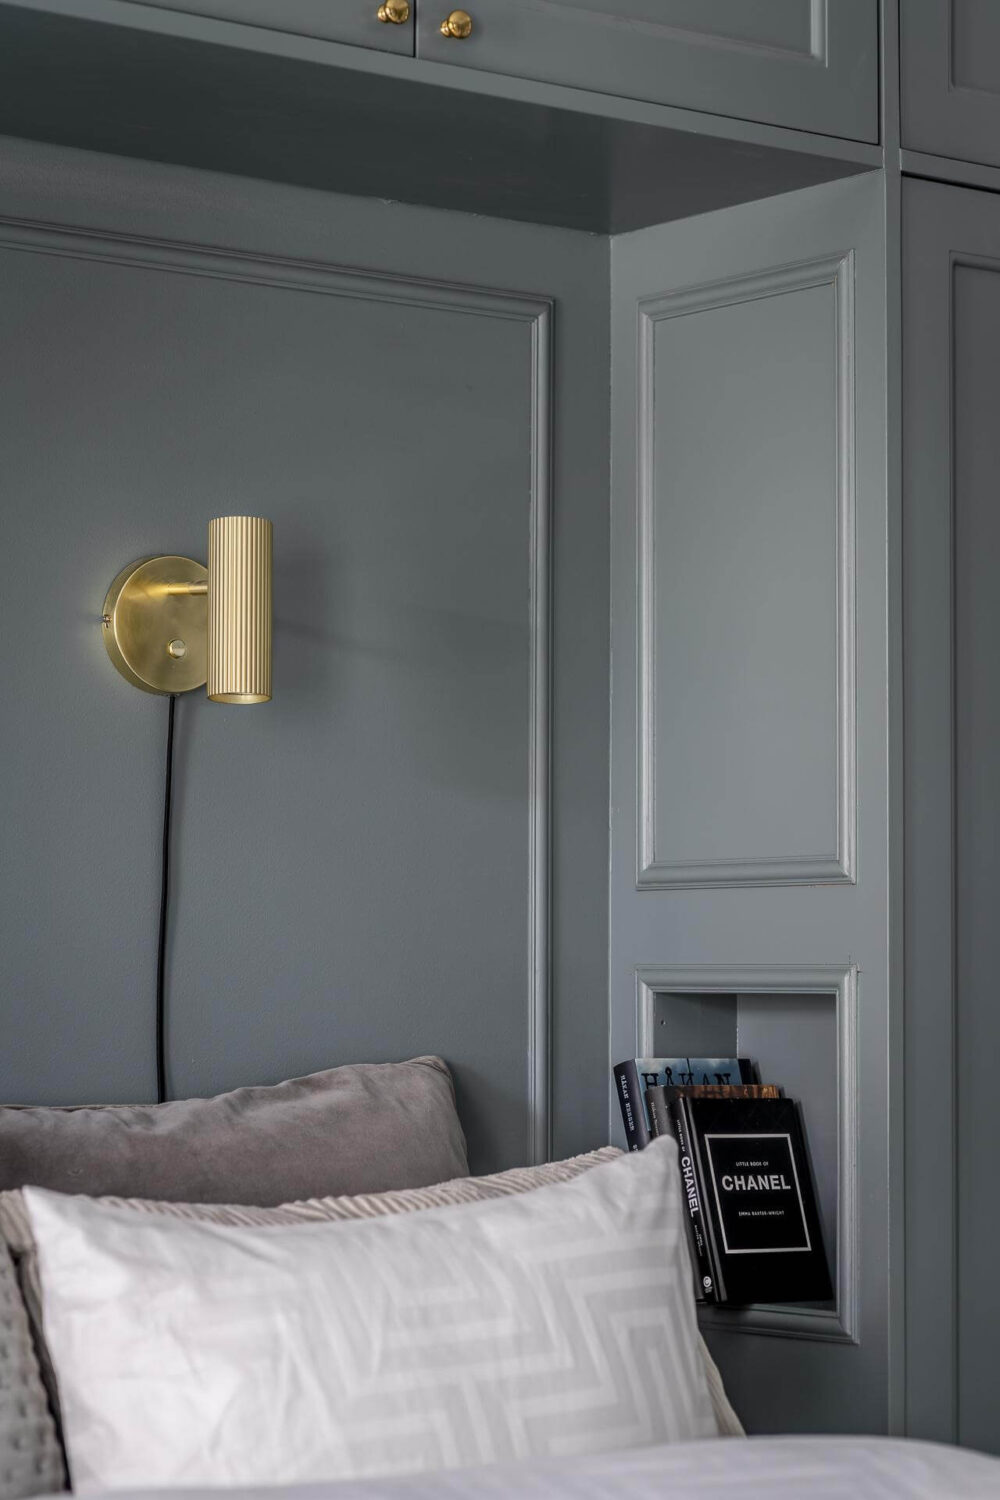 bedroom-detail-small-niche-books-sconce-nordroom